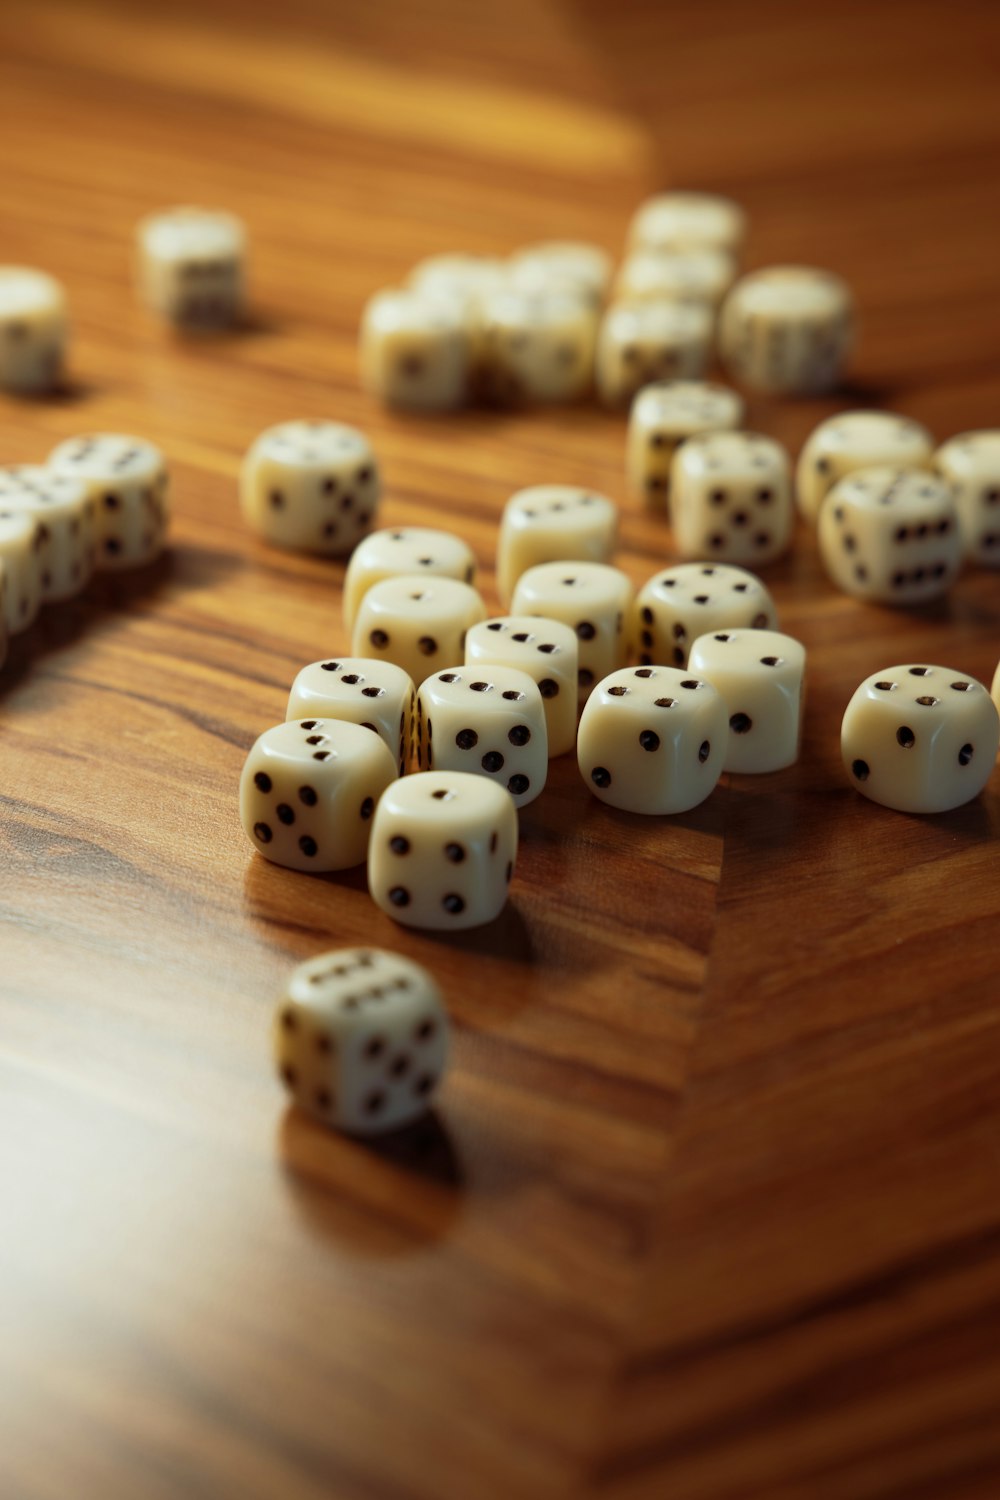 white-and-black dice